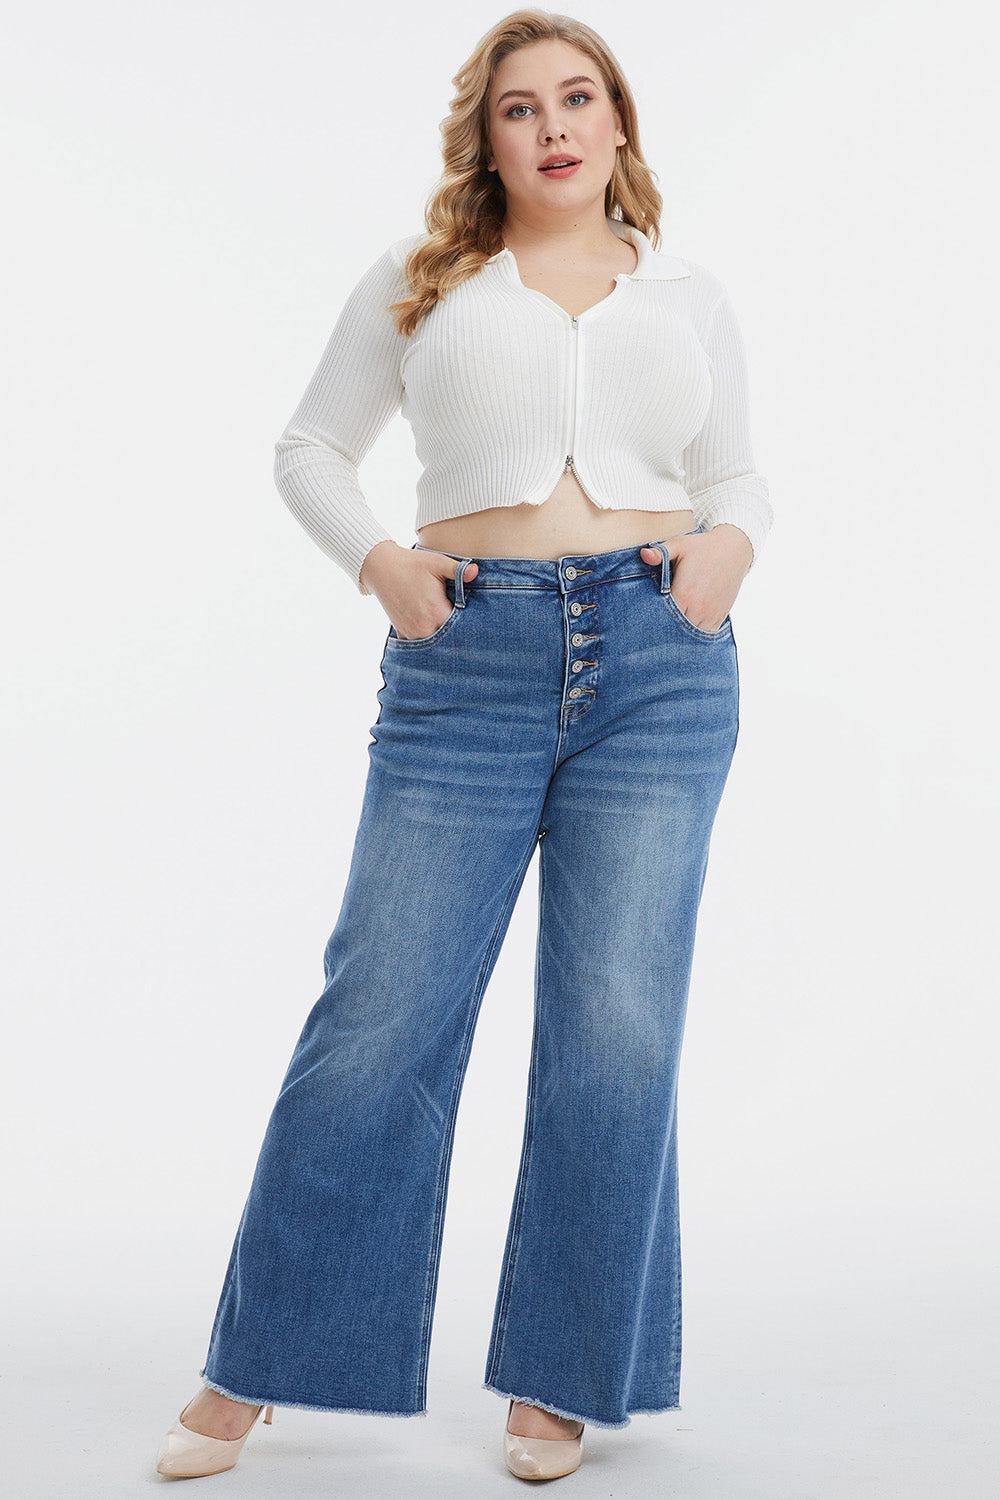 a woman in a white crop top and jeans